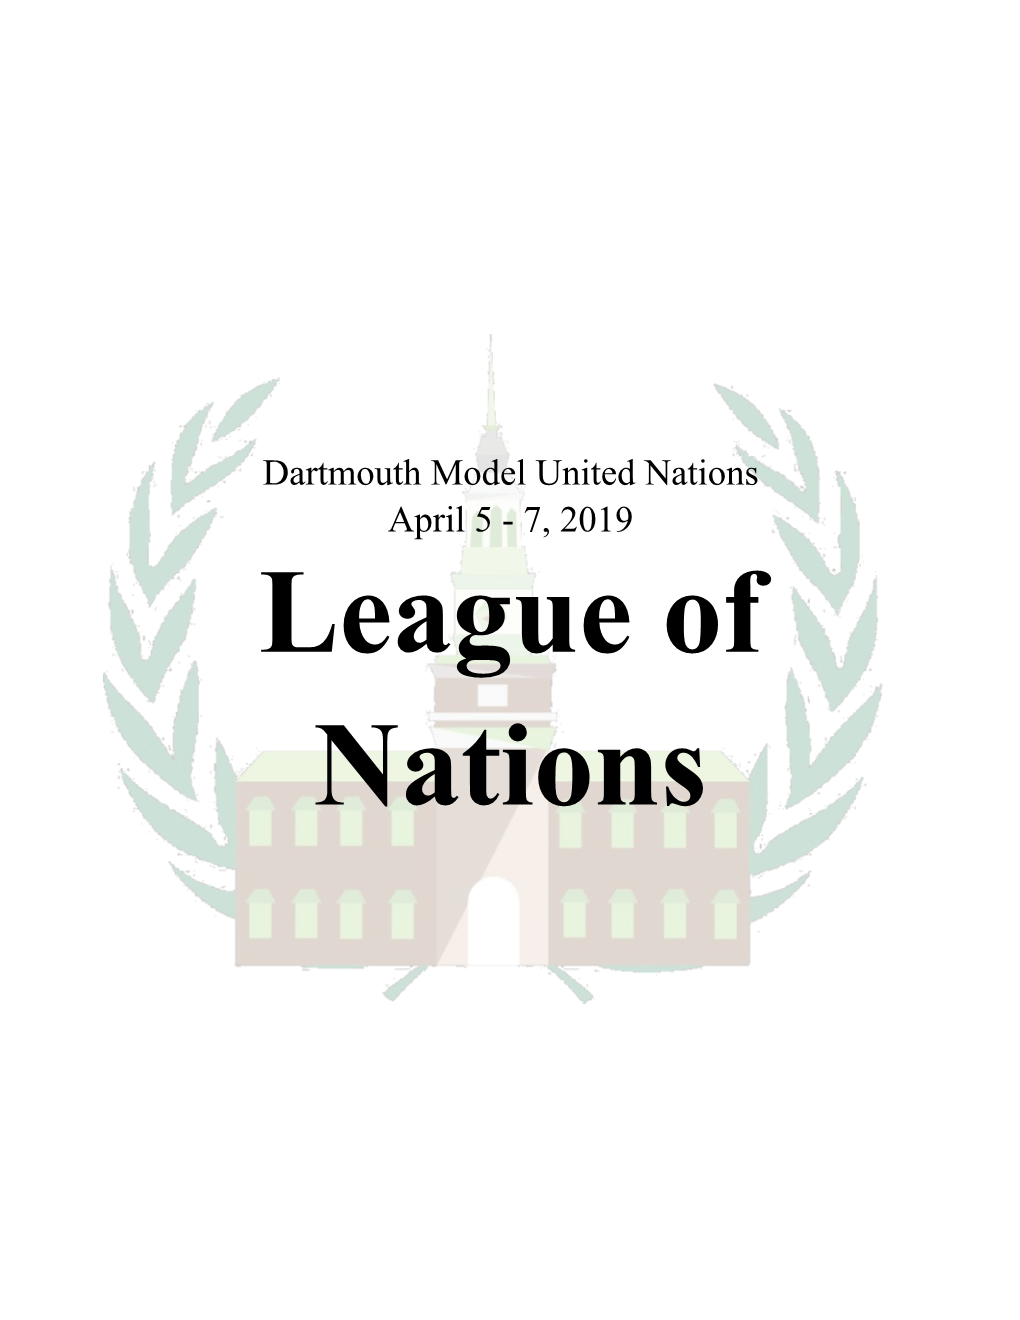 Dartmouth Model United Nations April 5 - 7, 2019 League of Nations